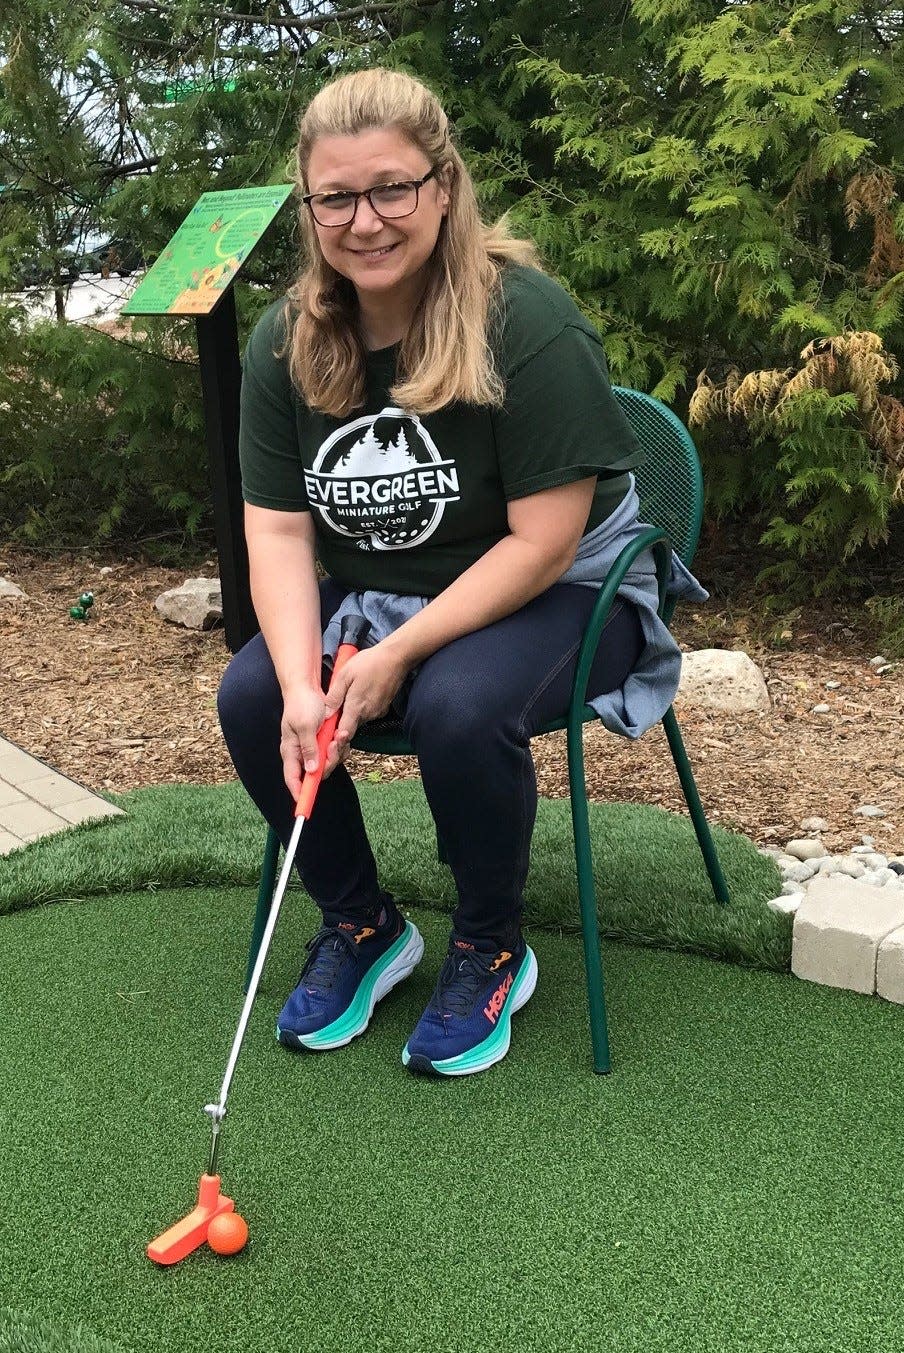 Kerry Johnson, owner of Evergreen Miniature Golf in Fish Creek, demonstrates how to use the hinged, adaptable putter that those in wheelchairs can use to play her course, which is accessible for all 18 holes.